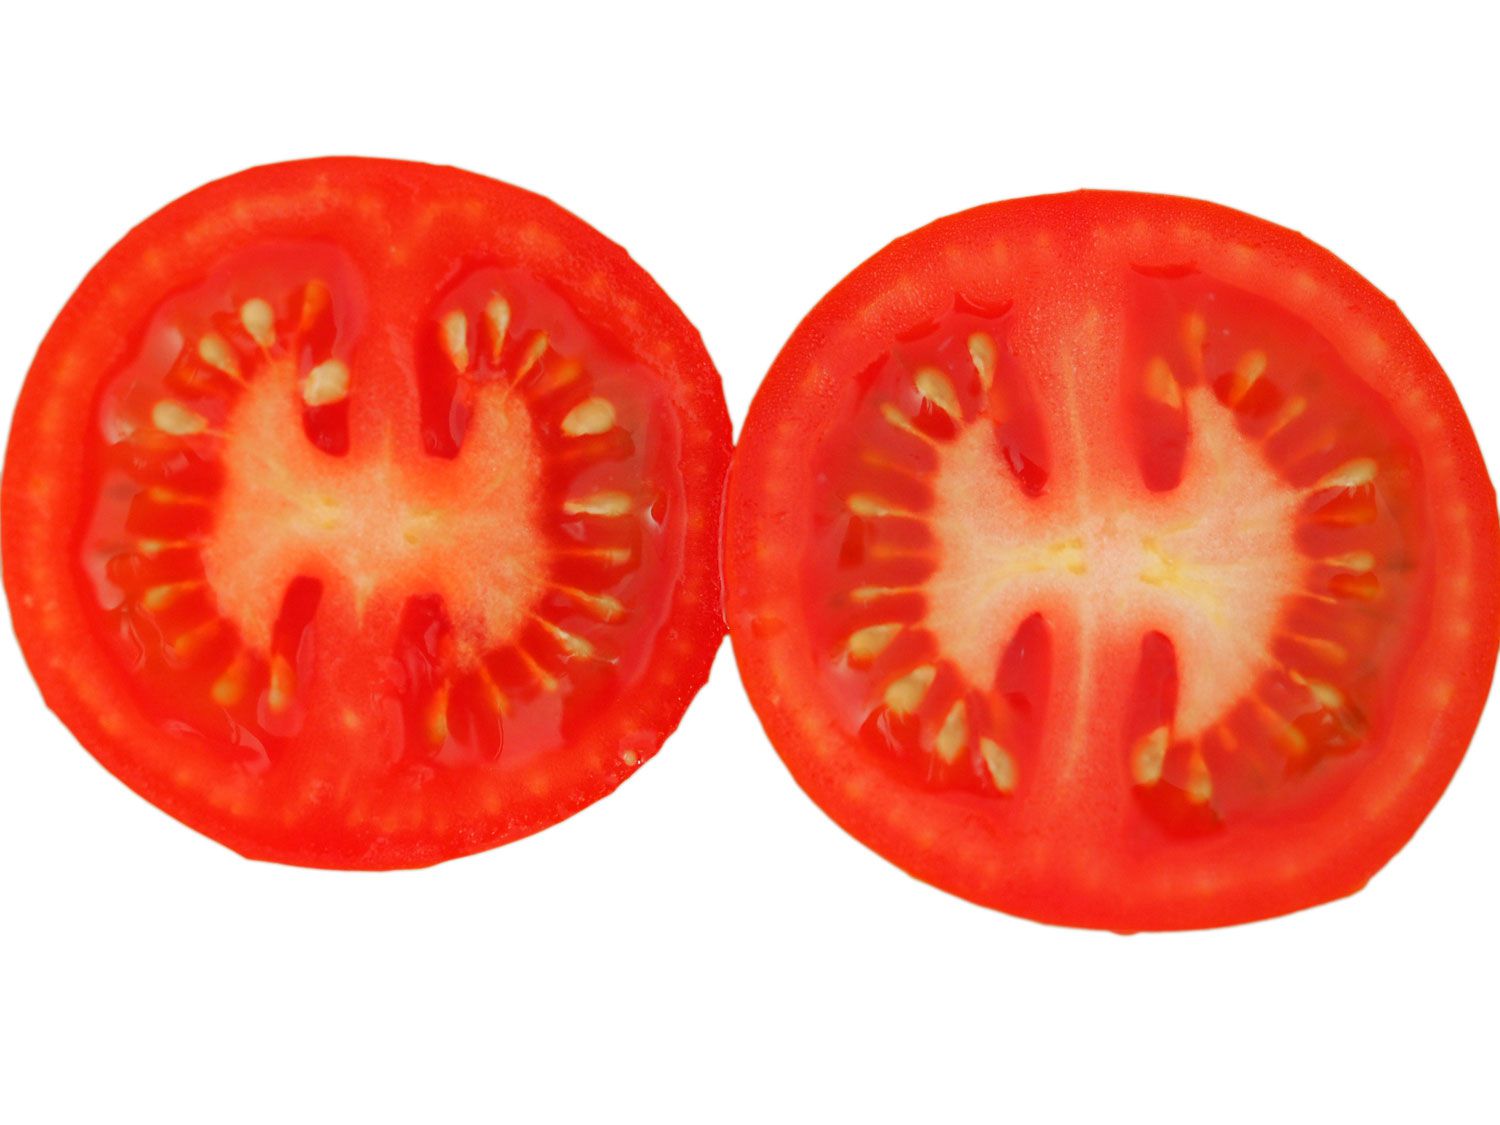 An overhead look at two cherry tomatoes cut in half so you can see inside.